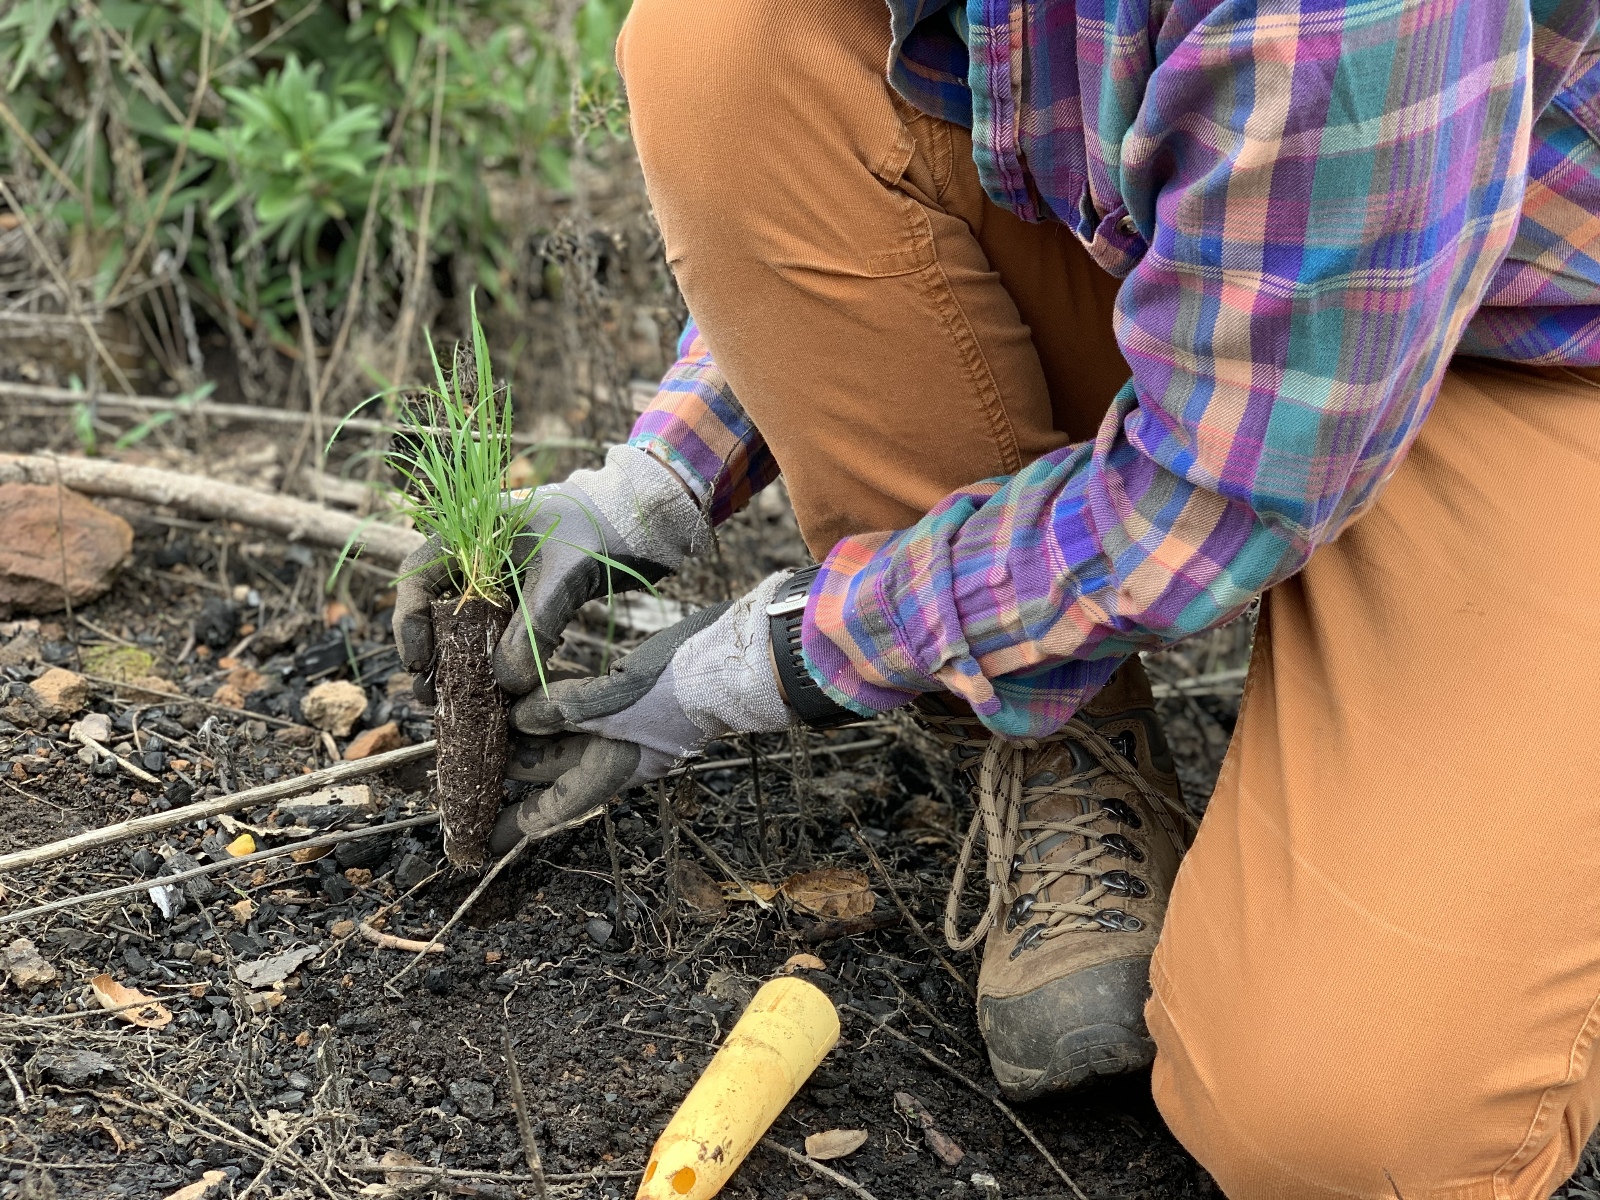 An environmental educator planing native bunch grasses in a burn scar left from an intentional burn